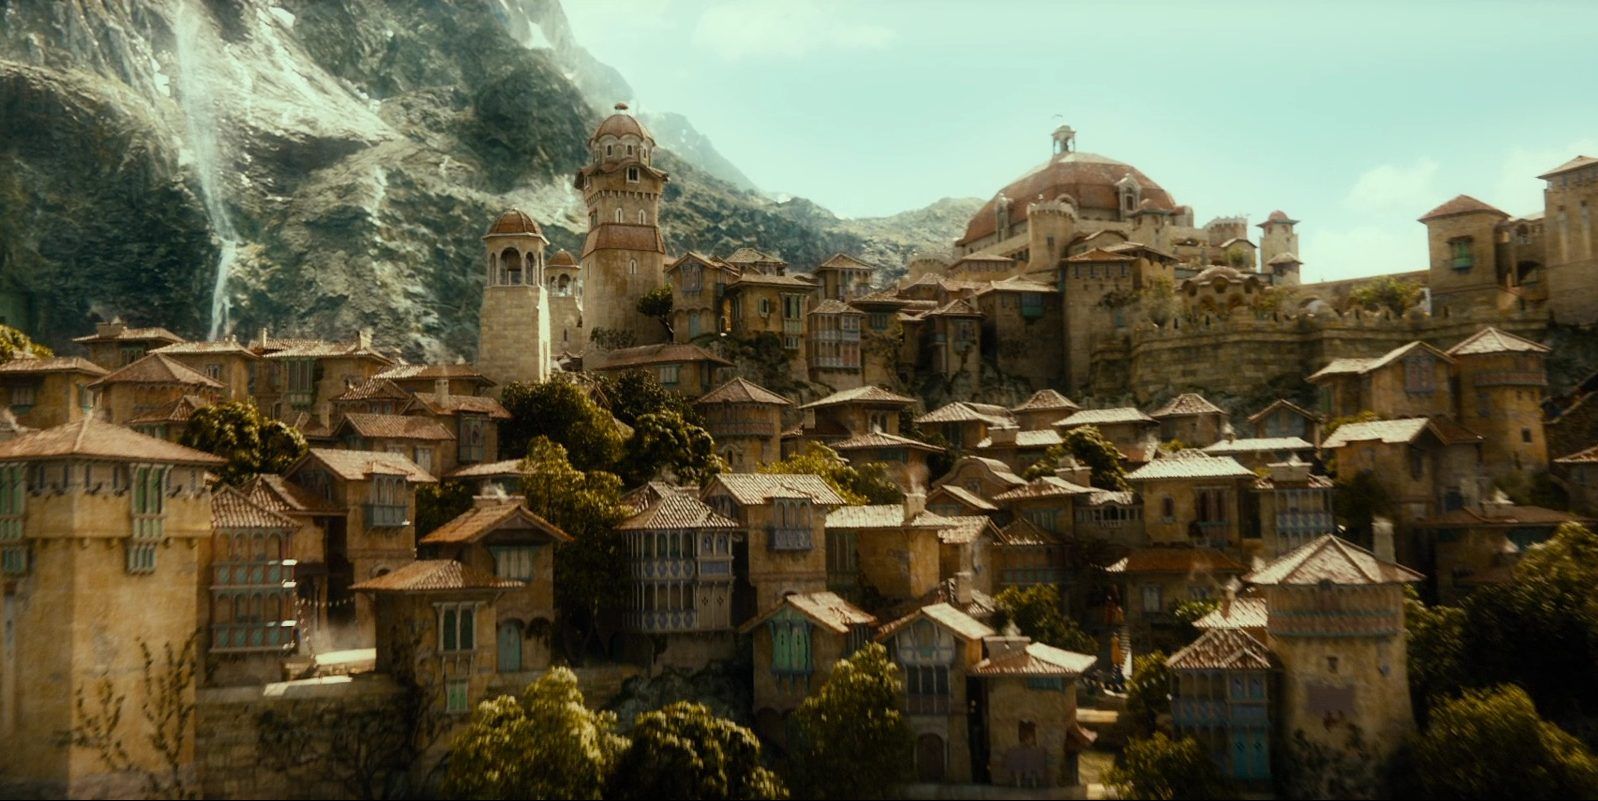 LOTR 10 Facts About Middle Earth They Left Out of the Movies